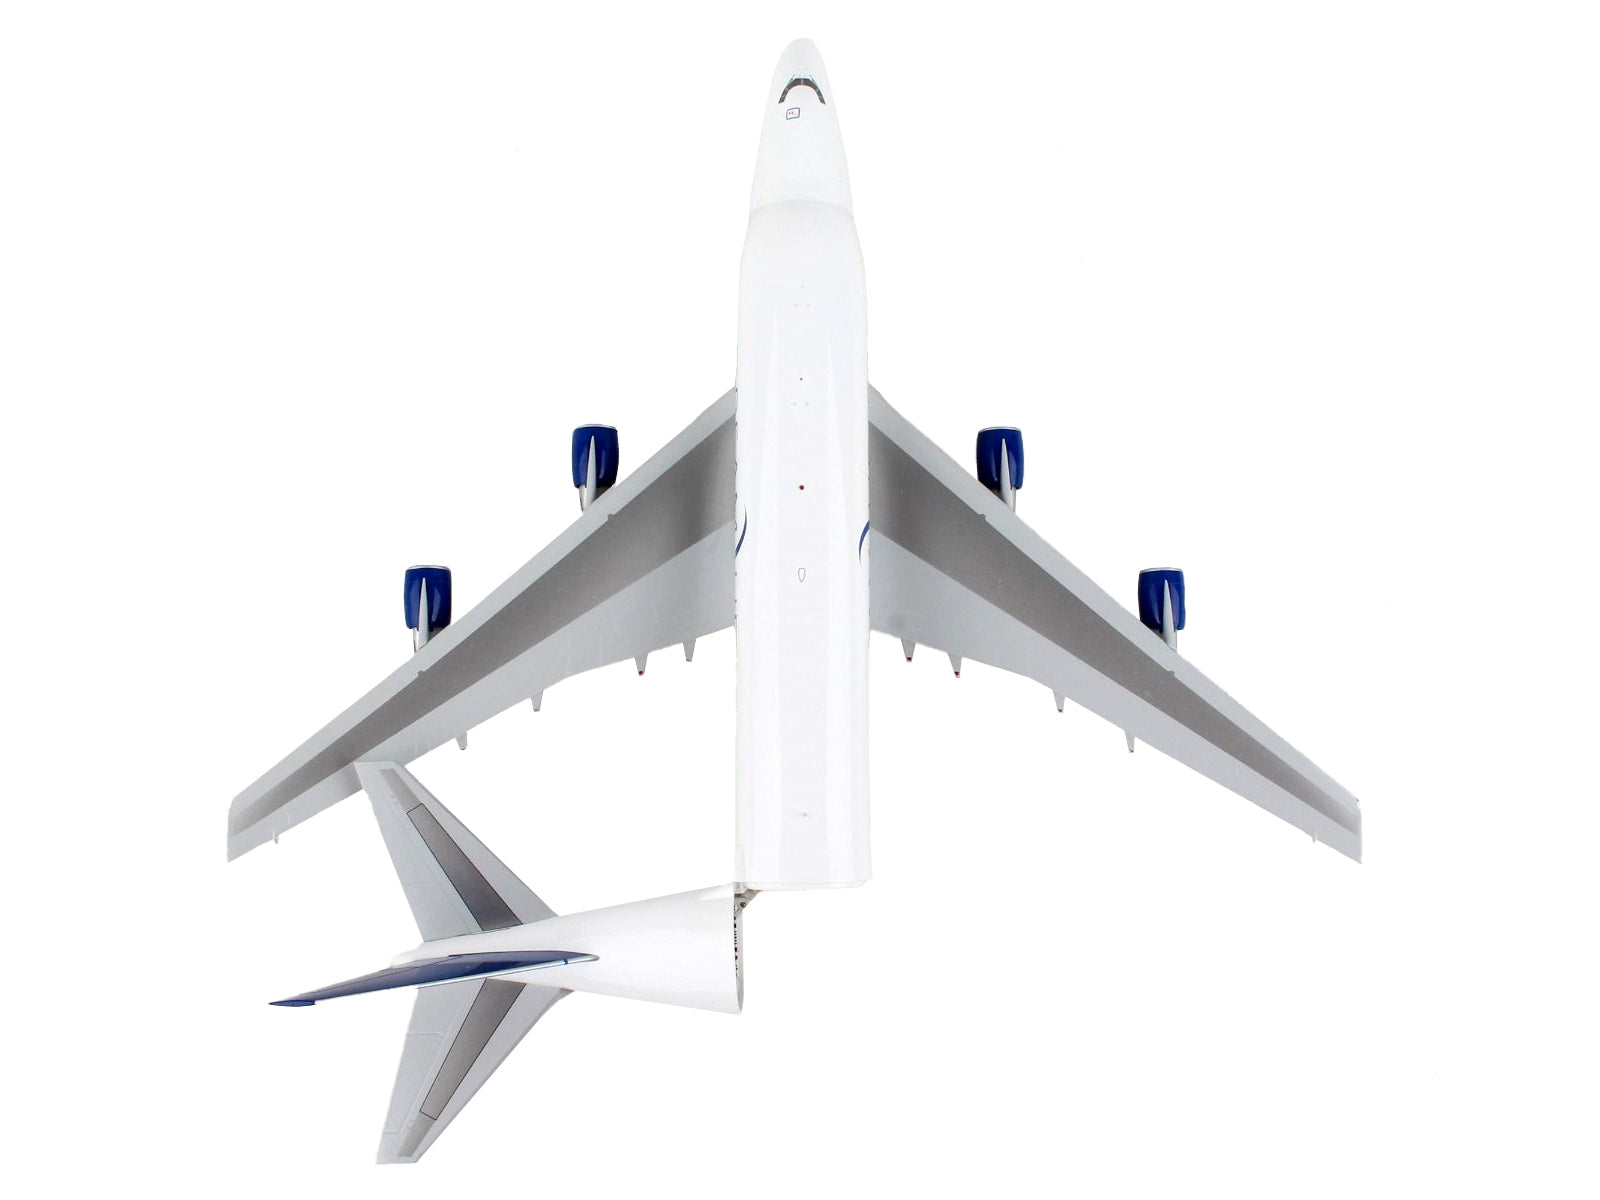 Boeing 747LCF Commercial Aircraft "Dreamlifter" White with Blue Tail "Gemini 200" Series 1/200 Diecast Model Airplane by GeminiJets